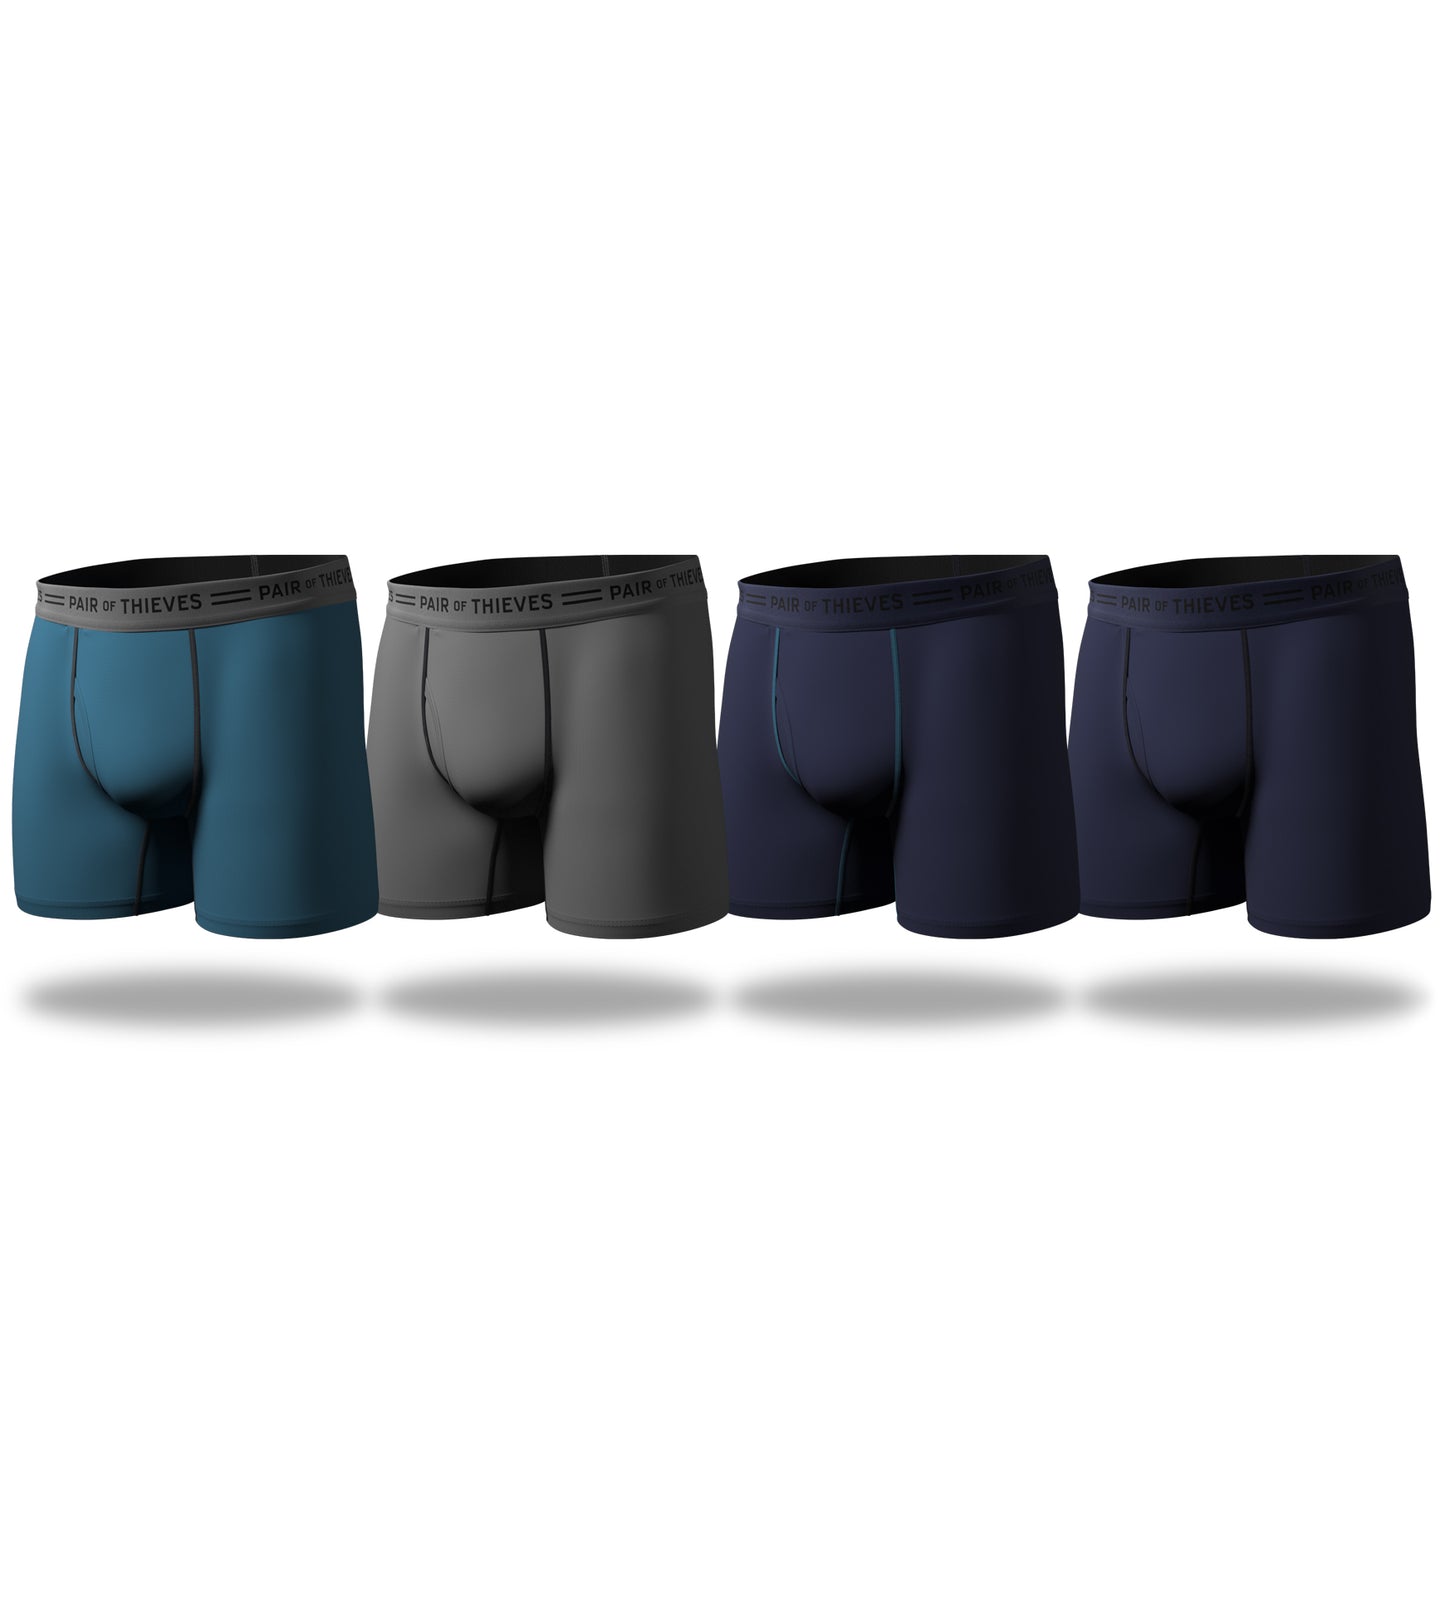 Every Day Kit Boxer Brief Bear Pack (16-pack) containing the colors Dark slate gray, Dark Gray, Dim gray, Black, Dark slate gray, Gains boro, Dim gray, Black, Dark slate gray